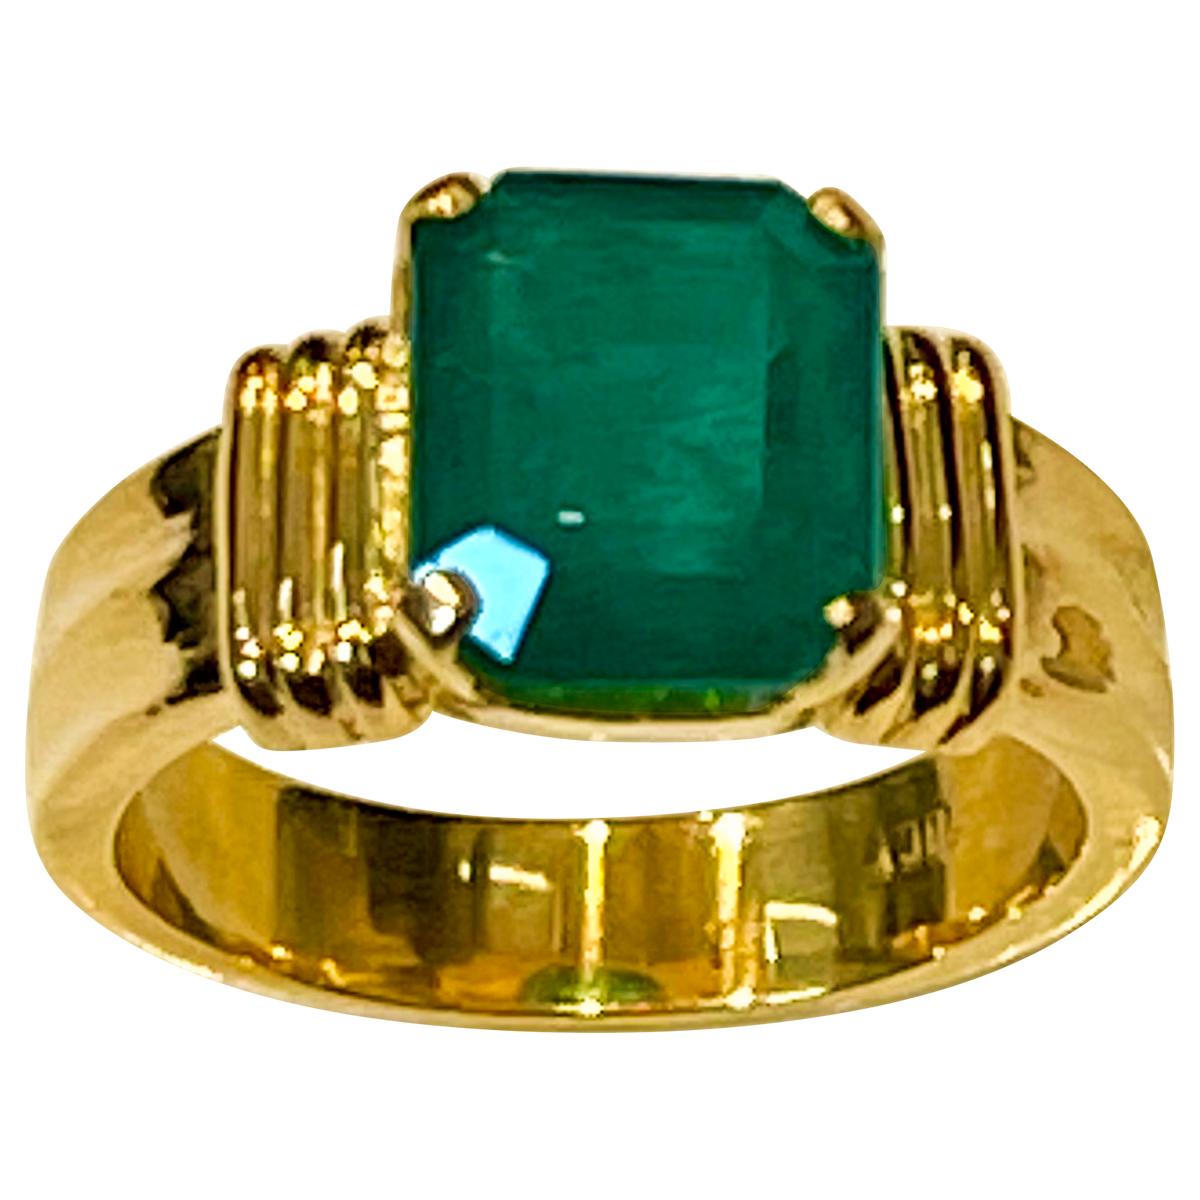 A classic, Cocktail ring 
8 X 10 Emerald  cut Emerald  Ring 18 Karat Yellow Gold Size 8
Emerald cut emerald is the most popular and in demand  Emerald 
Large size Emerald cut Emerald Intense green color with lots of shine and brilliance but has